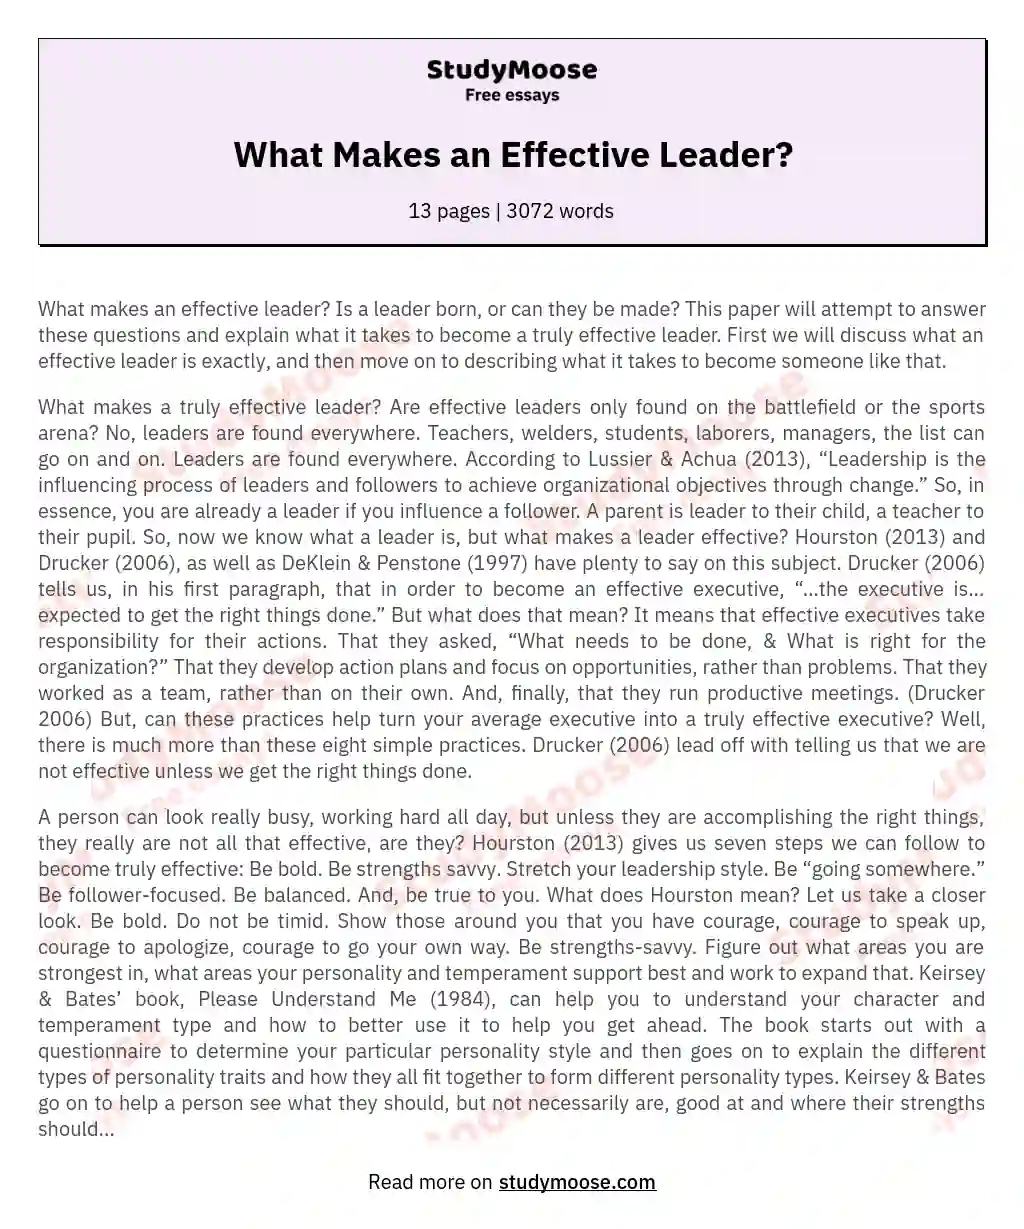 Qualities of Effective Leaders: Born or Developed? essay